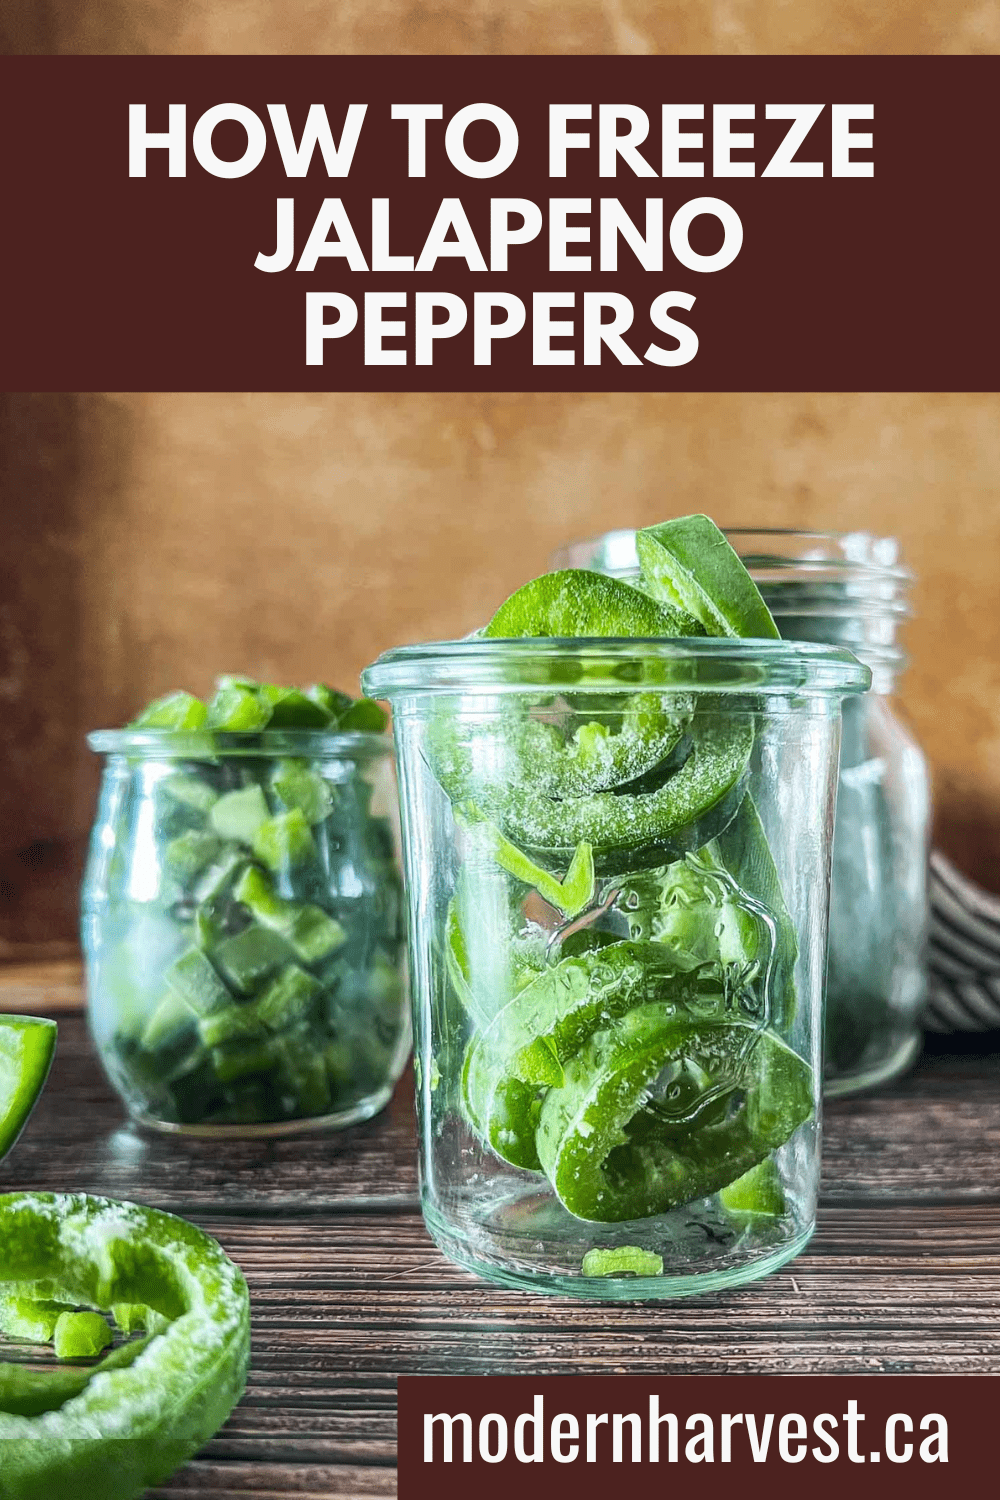 Frozen jalapenos in a glass jars with more frozen pieces scattered on a wooden surface.